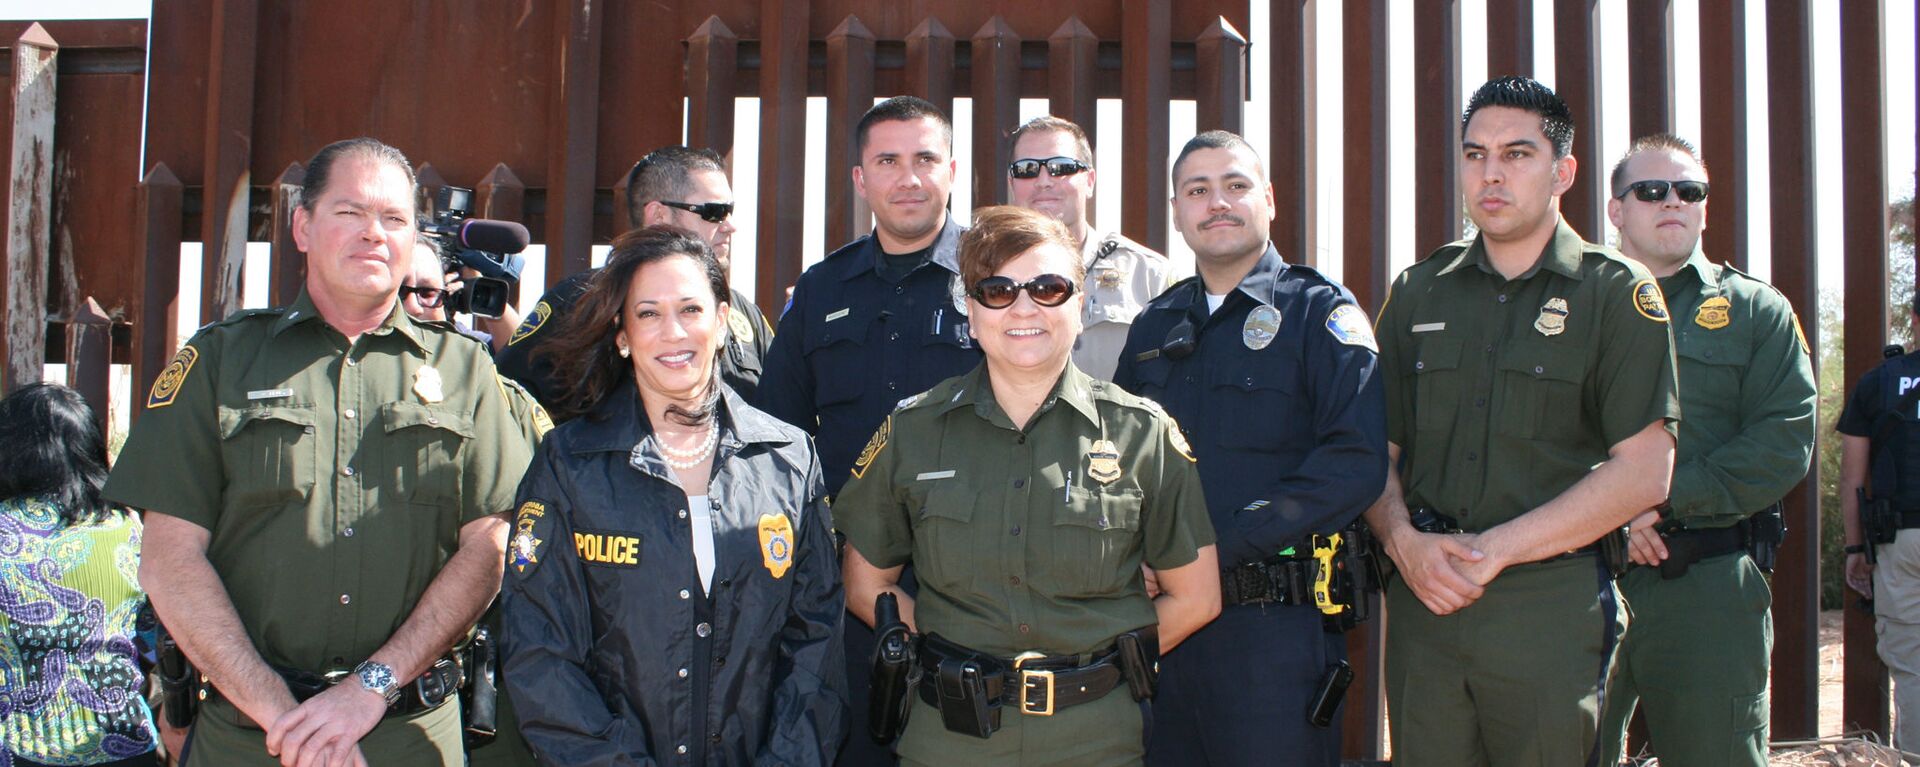 Then-Attorney General Kamala D. Harris joined by representatives of Imperial Valley Police, U.S. Customs and Border Protection and California Highway Patrol on March 24, 2011 - Sputnik International, 1920, 23.03.2022